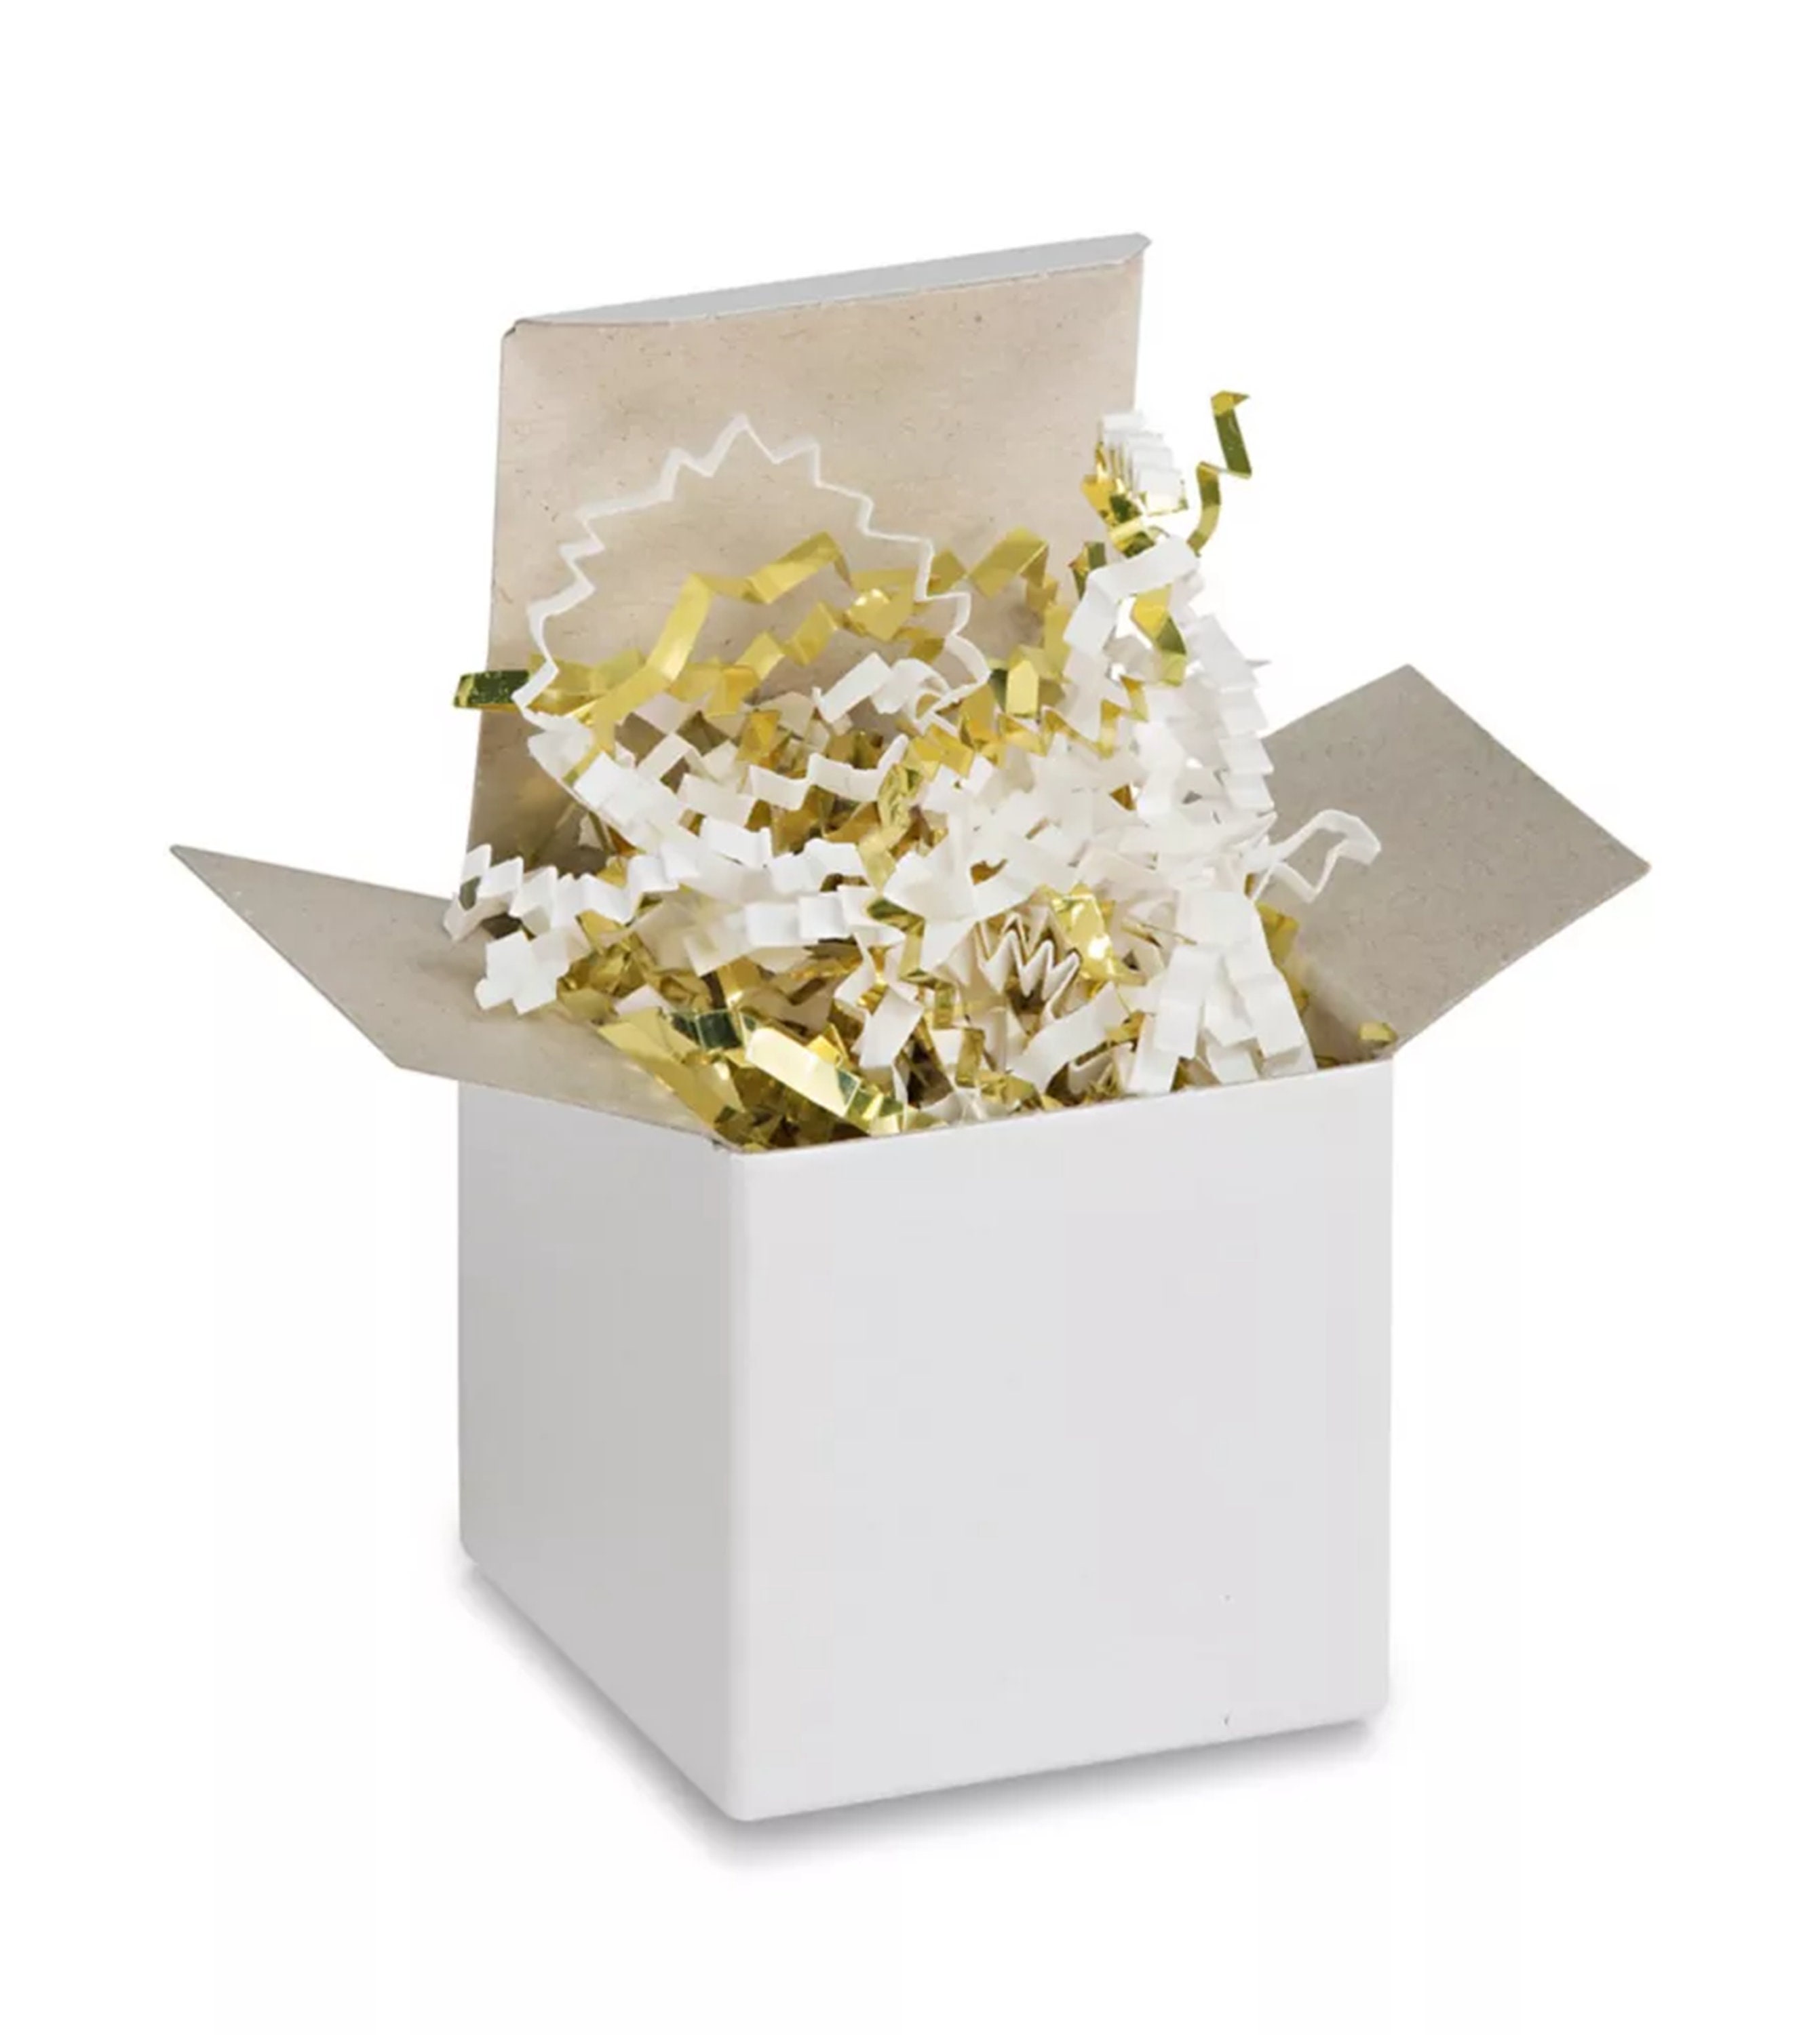  BOX USA 40 lb. White Crinkle Paper Packing, Shipping, and  Moving Box Filler Shredded Paper for Box Package, Basket Stuffing, Bag,  Gift Wrapping, Holidays, Crafts, and Decoration : Health & Household